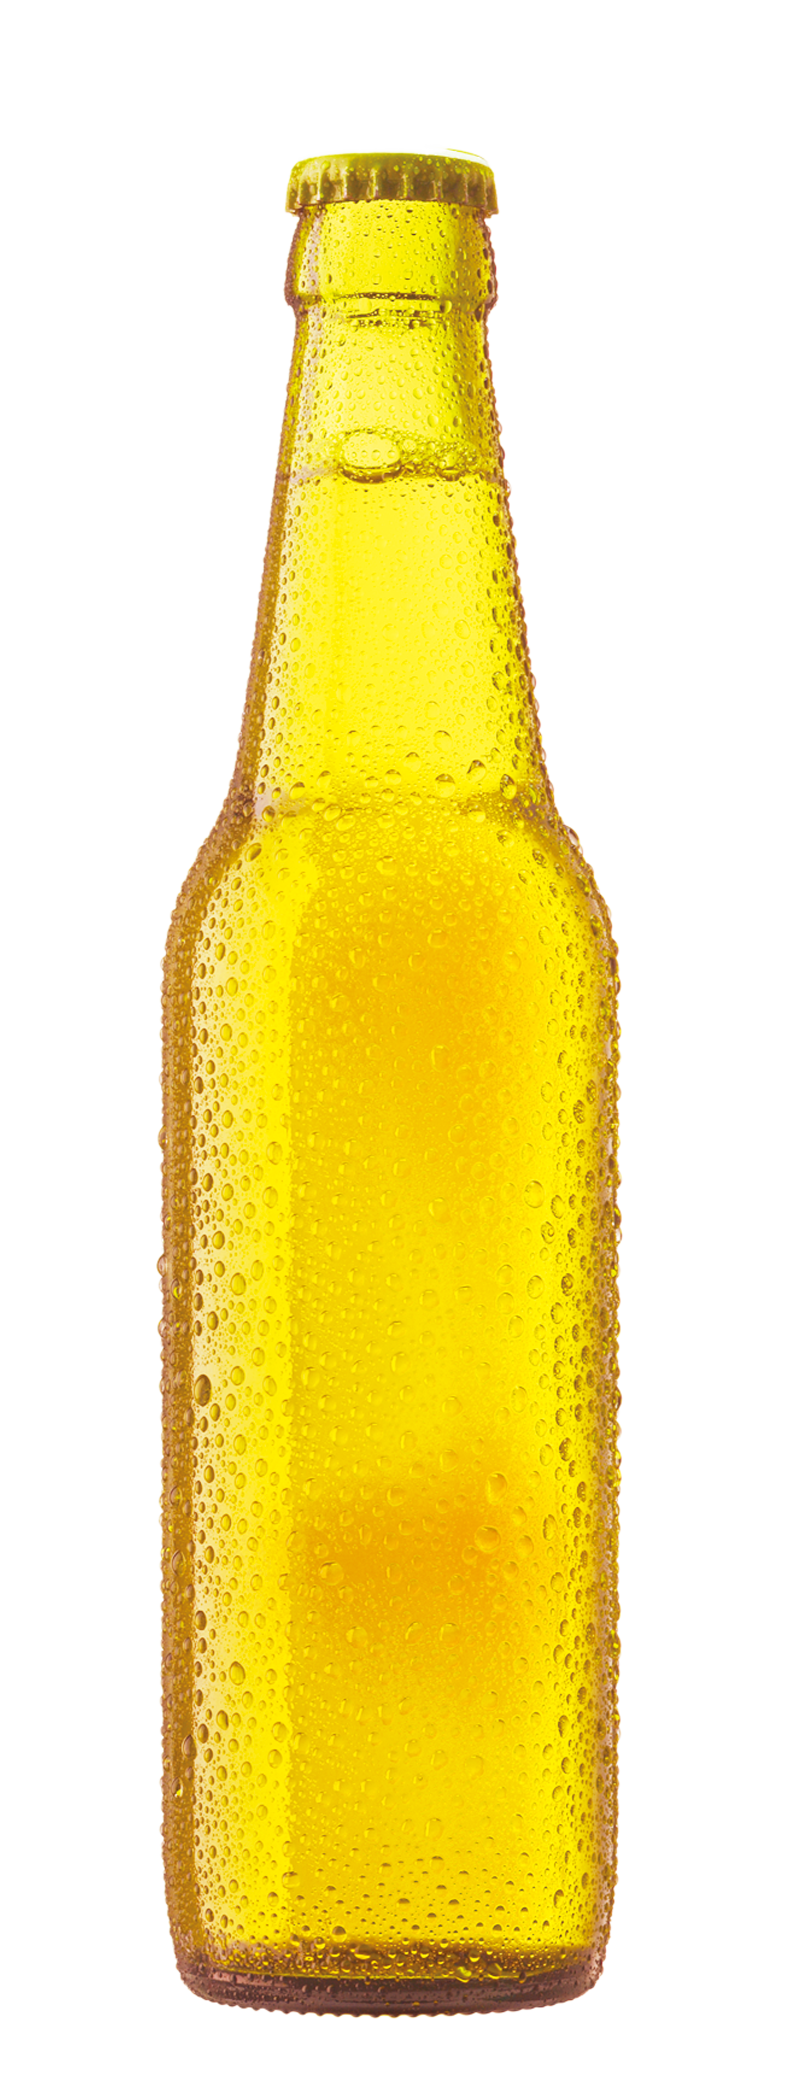 Beer Bottle Cup Free Clipart HQ Clipart